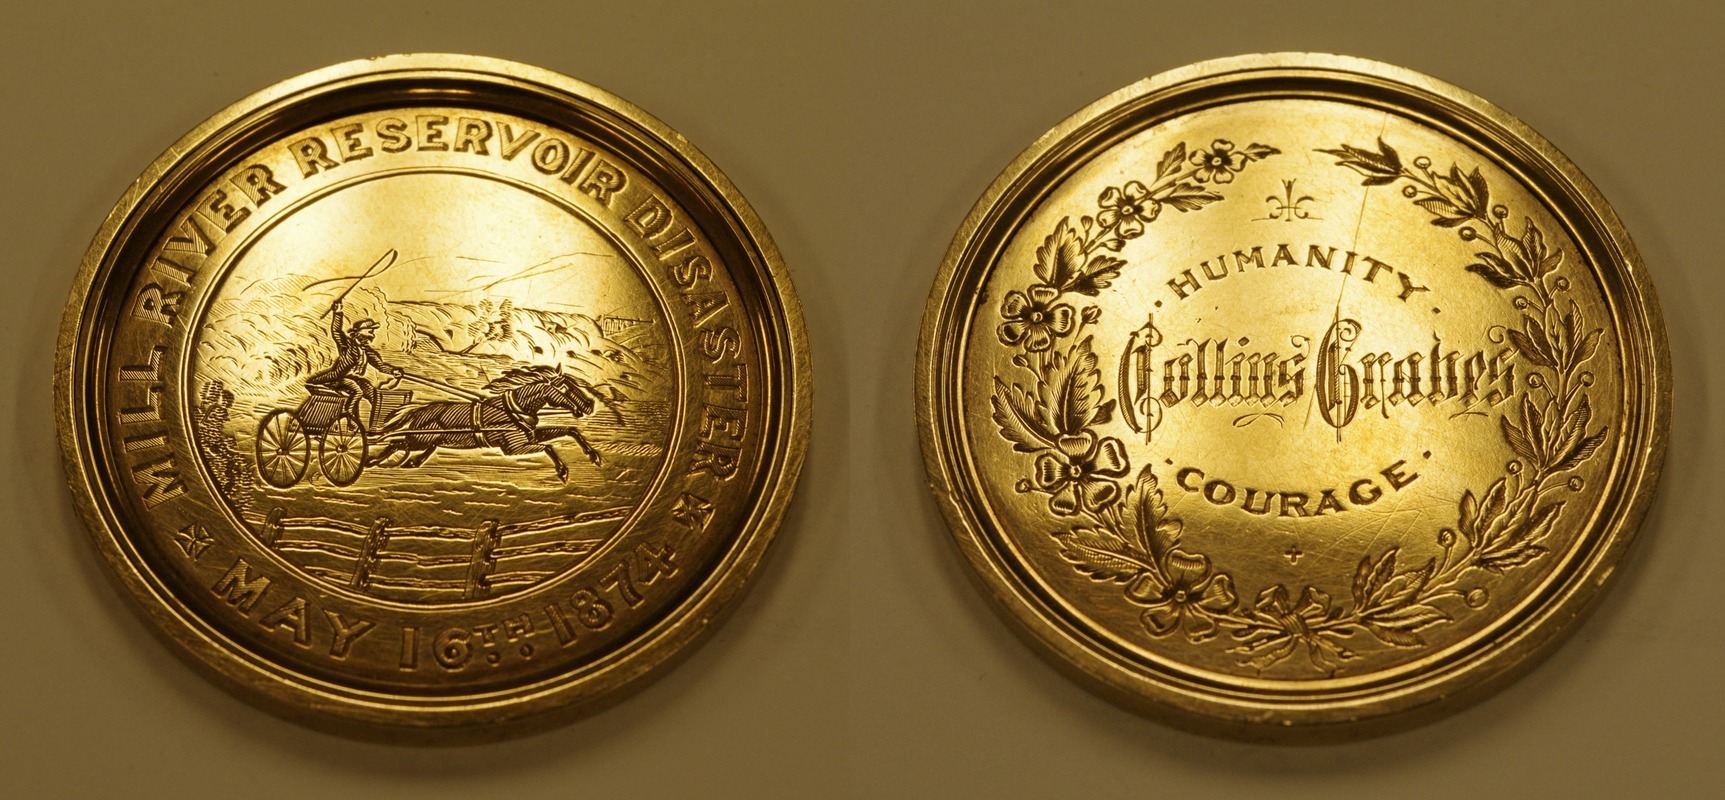 Collins Graves' medal for heroism during the Mill River Disaster, Williamsburg, Mass., 1874